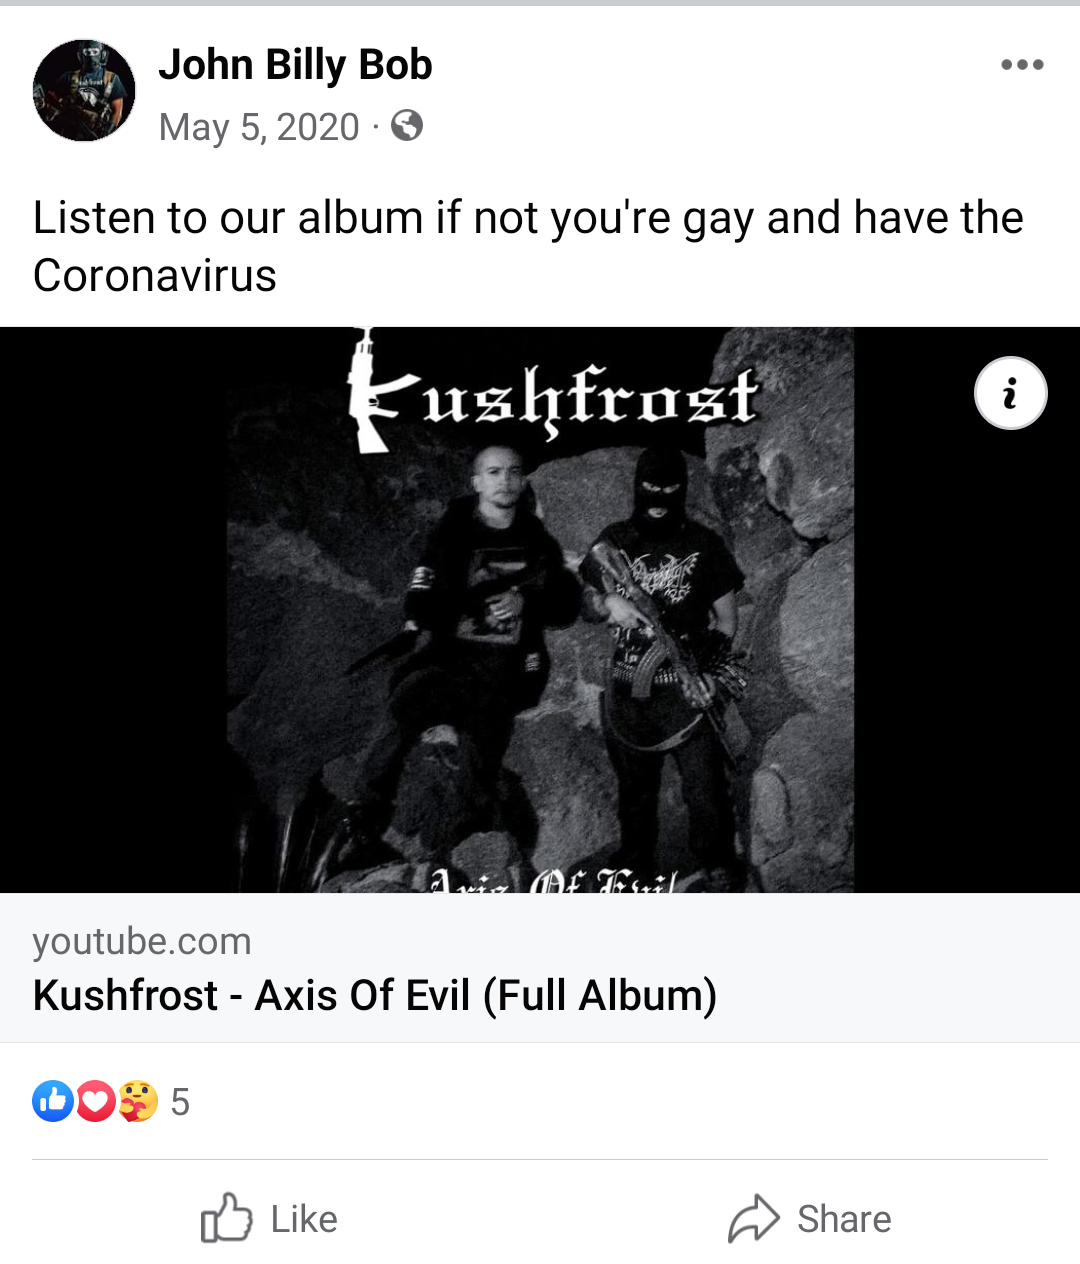 Kushfrost facebook post saying 'listen to our album if you're not gay and have the coronavirus.' the album is two people posing in front of some rocks while holding rifles and wearing balaclavas. album is called 'axis of evil'